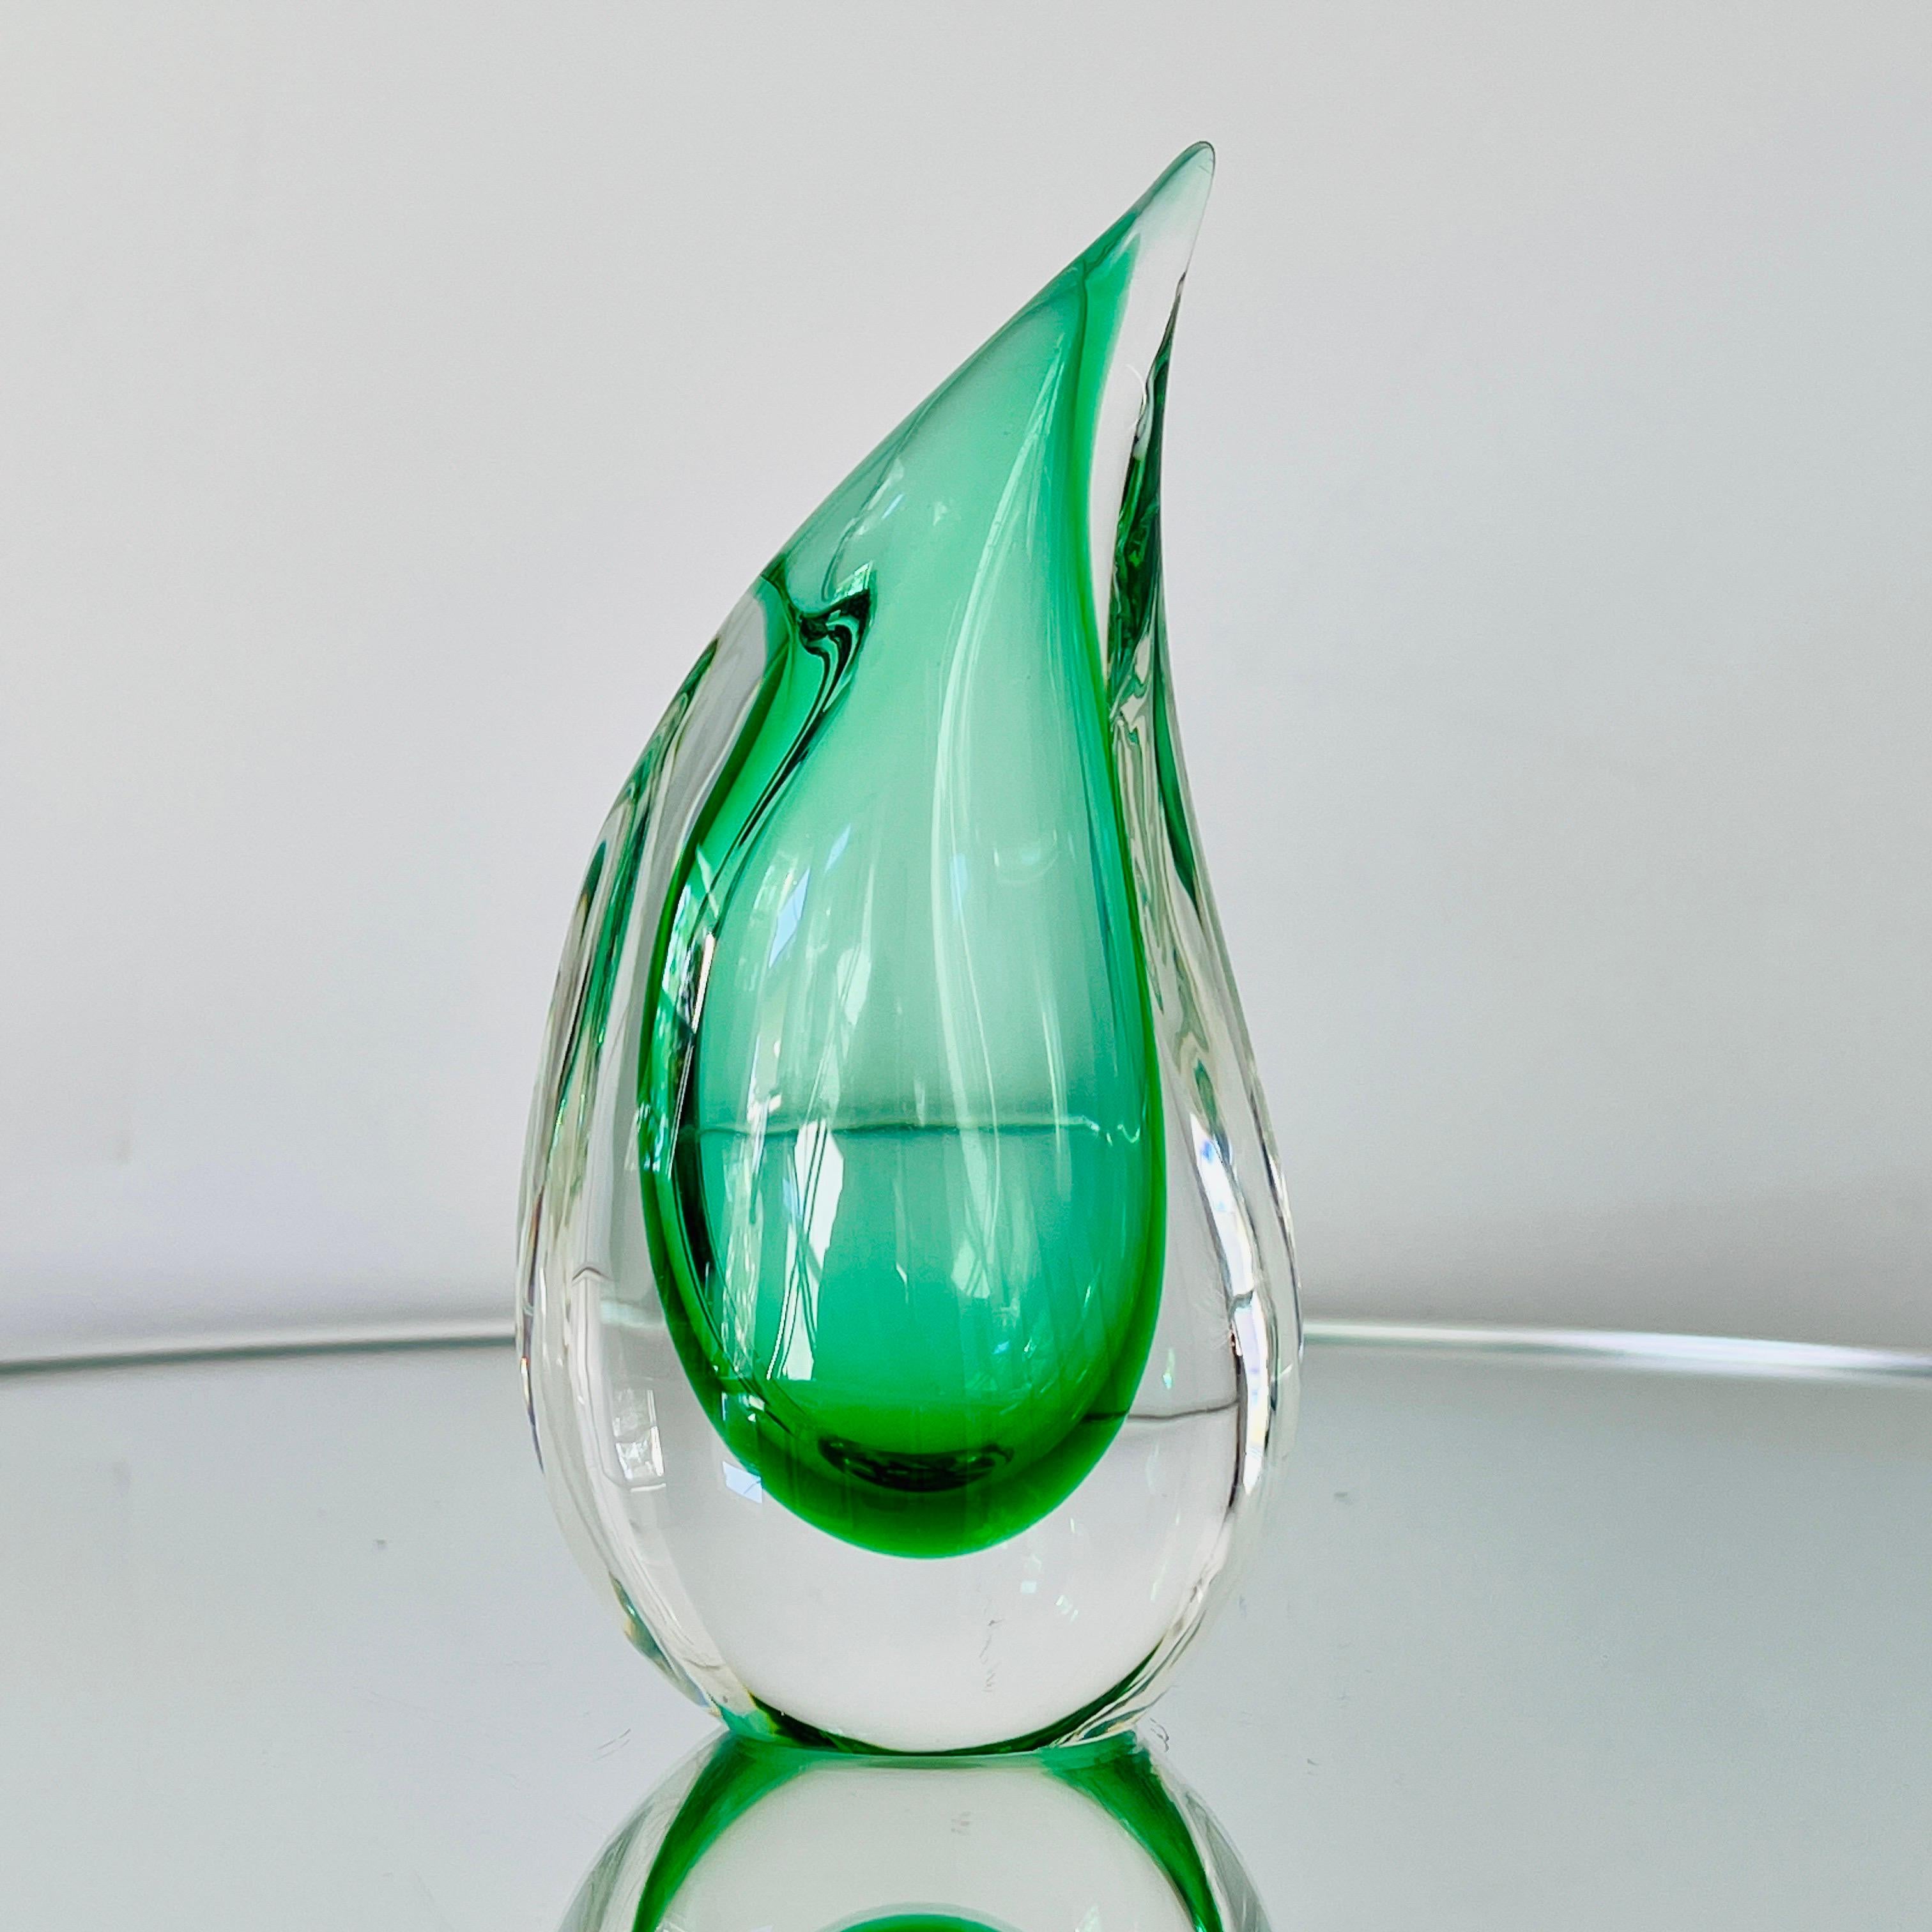 Mid-Century Modern handblown vase with flame tip design.  The bud vase features a teardrop base using the sommerso technique which incorporates layers of colors.  Hues of emerald green over clear glass makes this a stunning decorative object. 